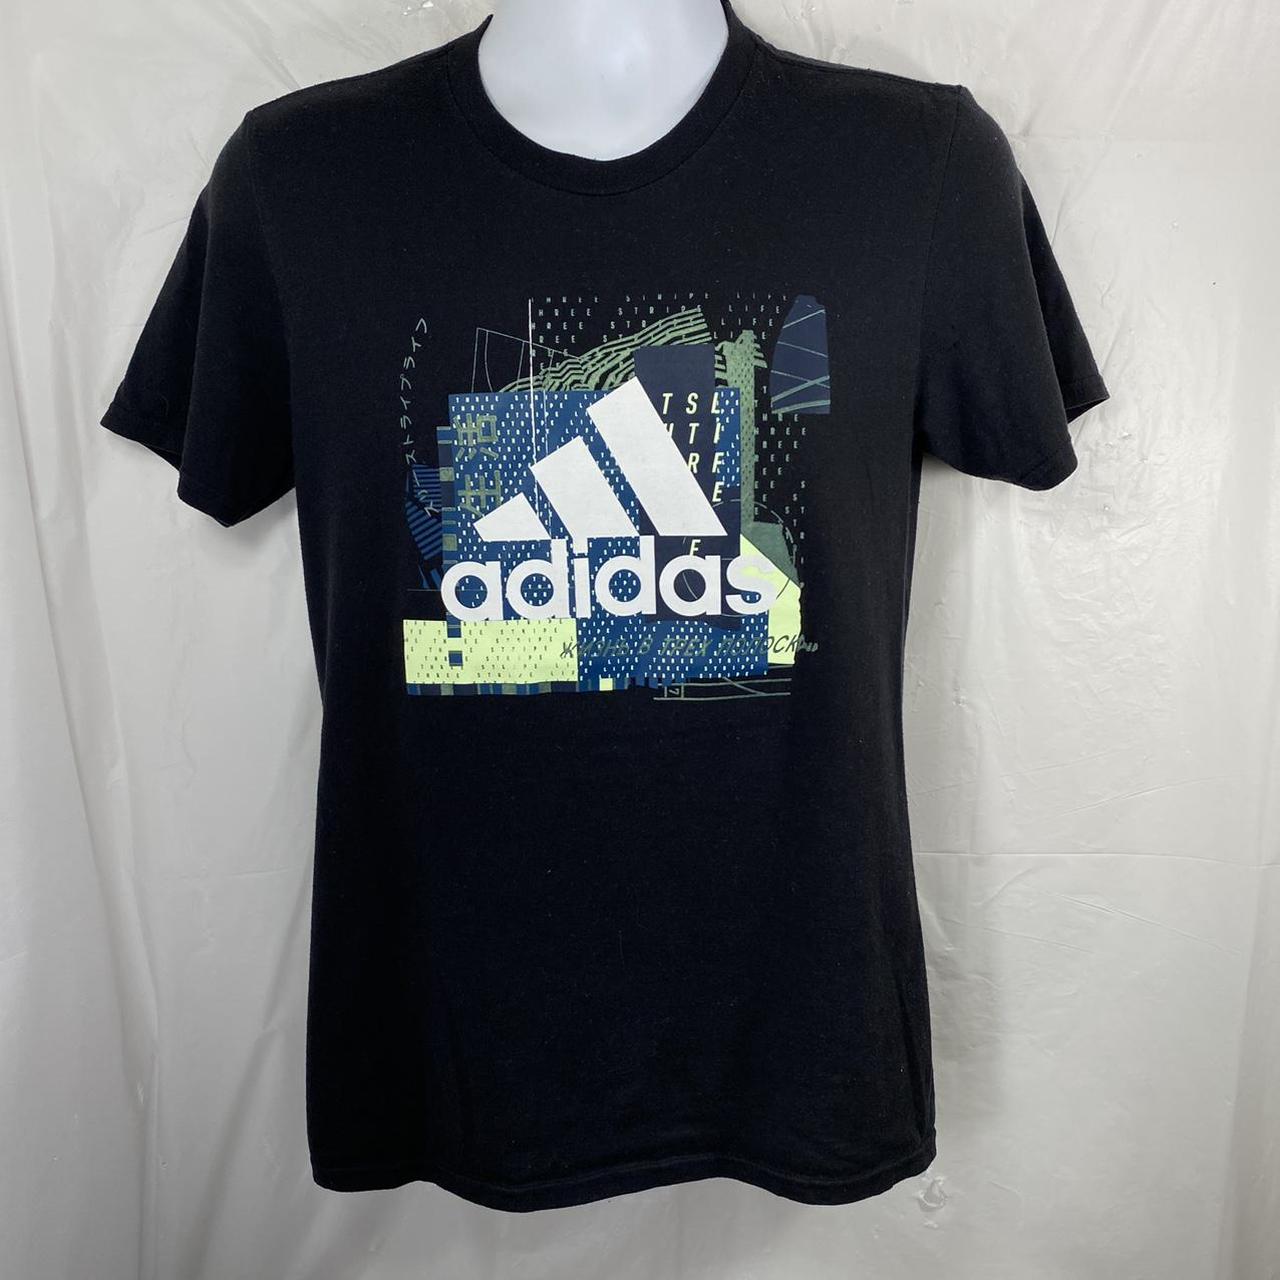 Mens adidas go to graphic tee shirt in black with a... - Depop